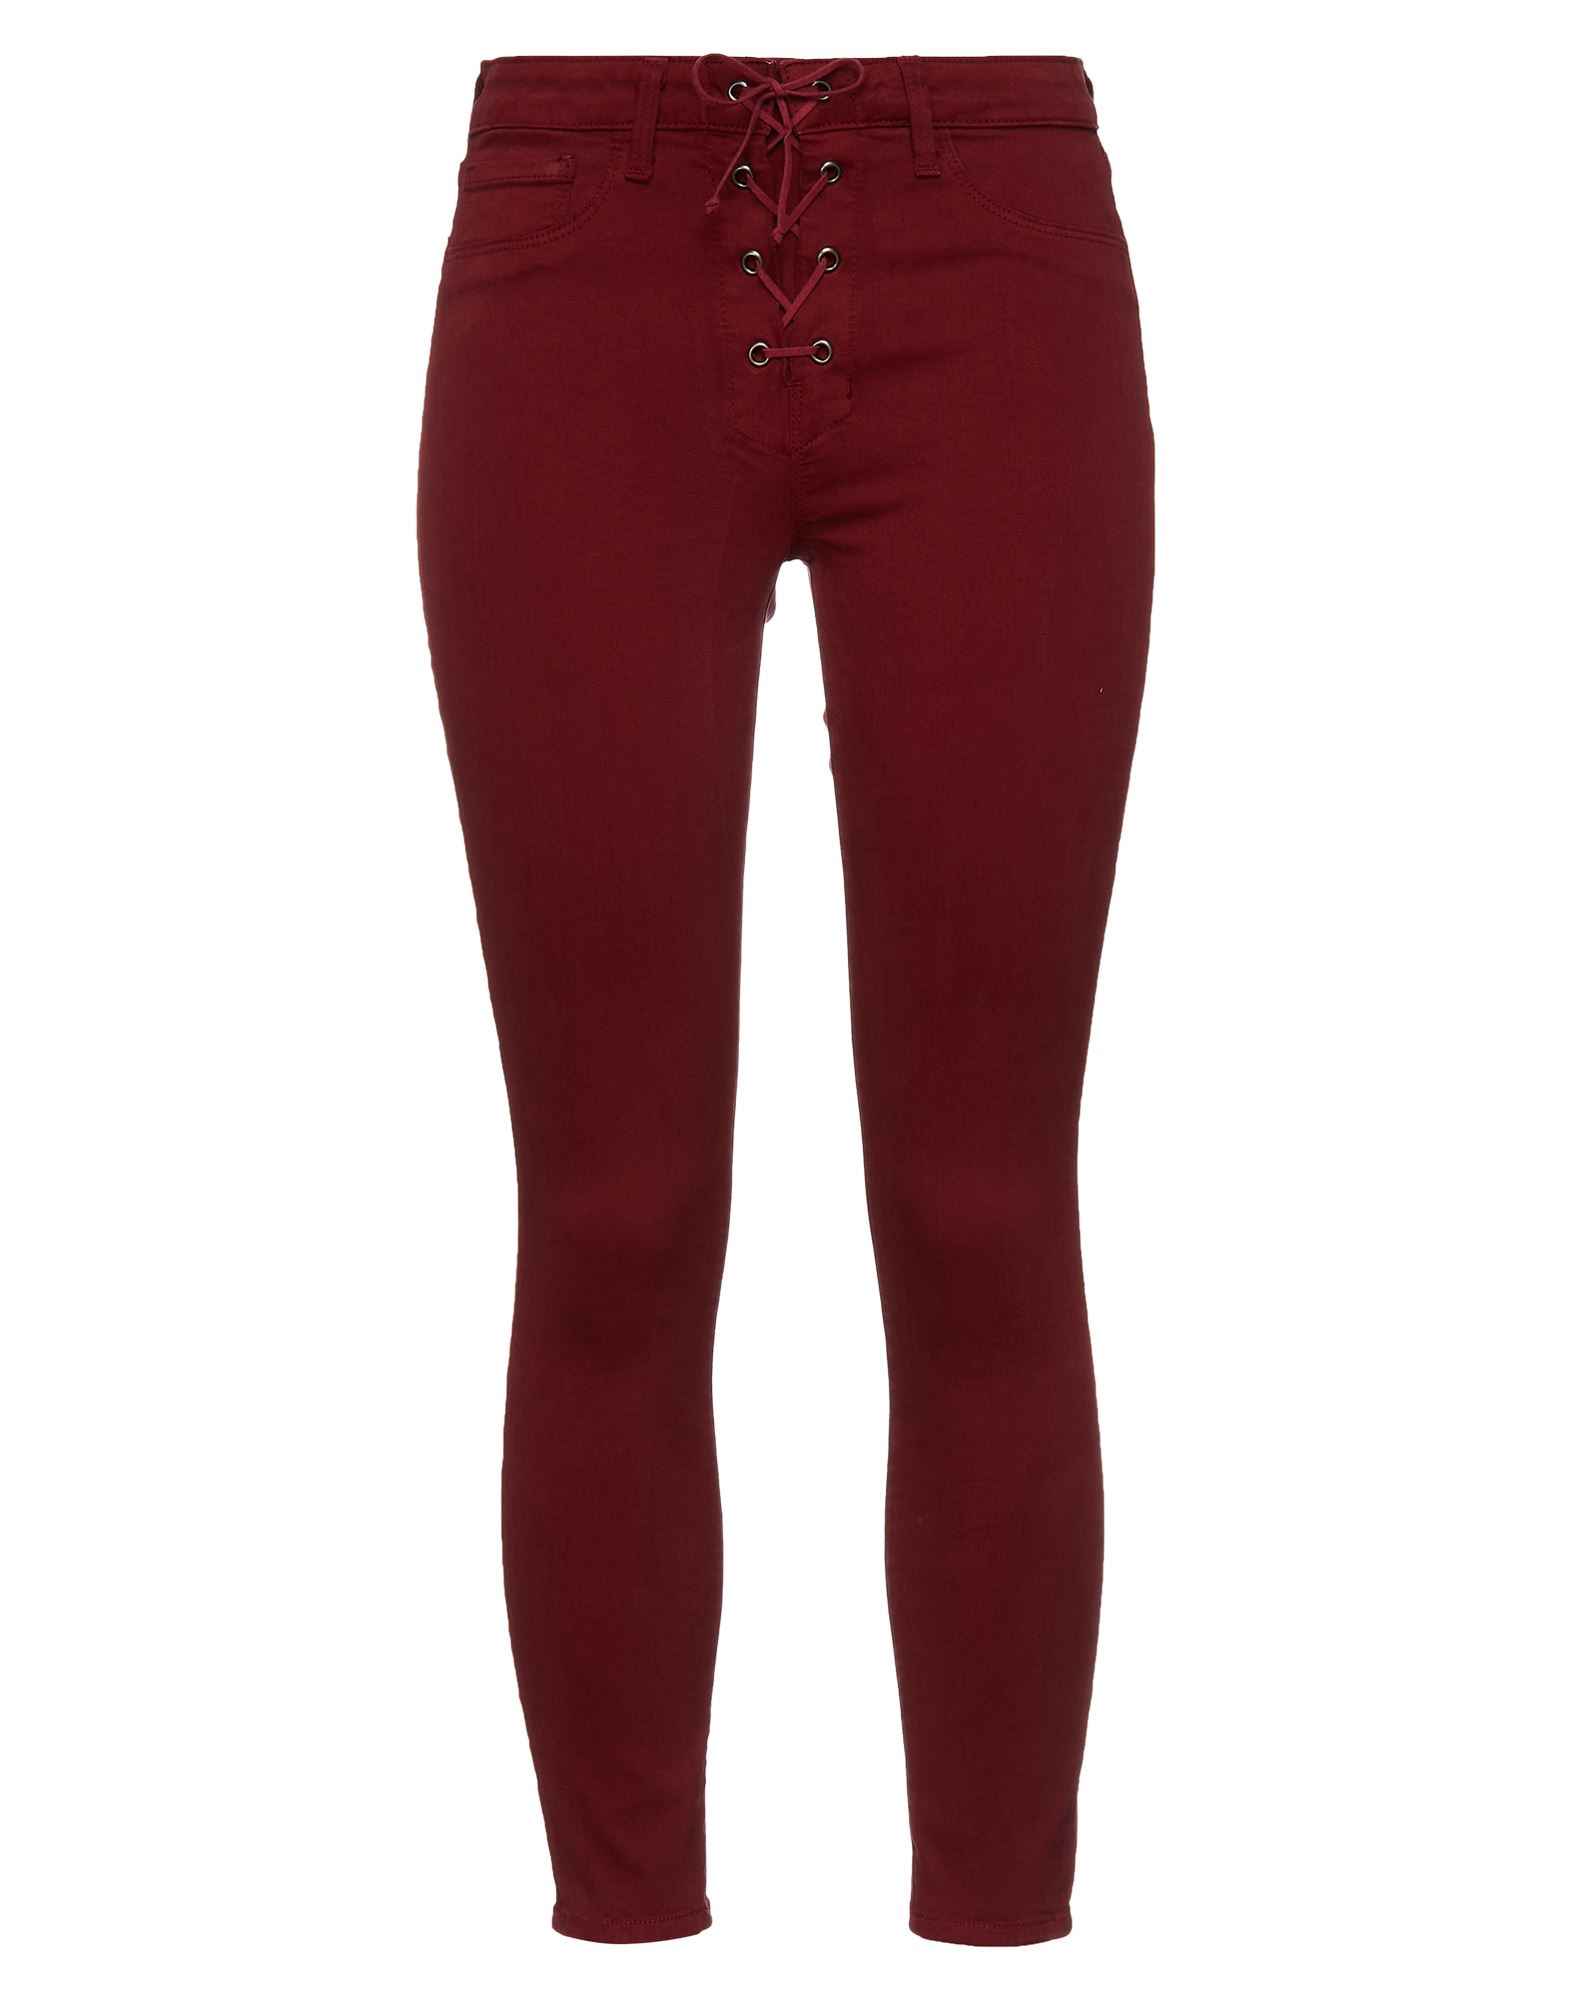 L Agence L'agence Woman Jeans Garnet Size 29 Cotton, Polyester, Elastane In Red